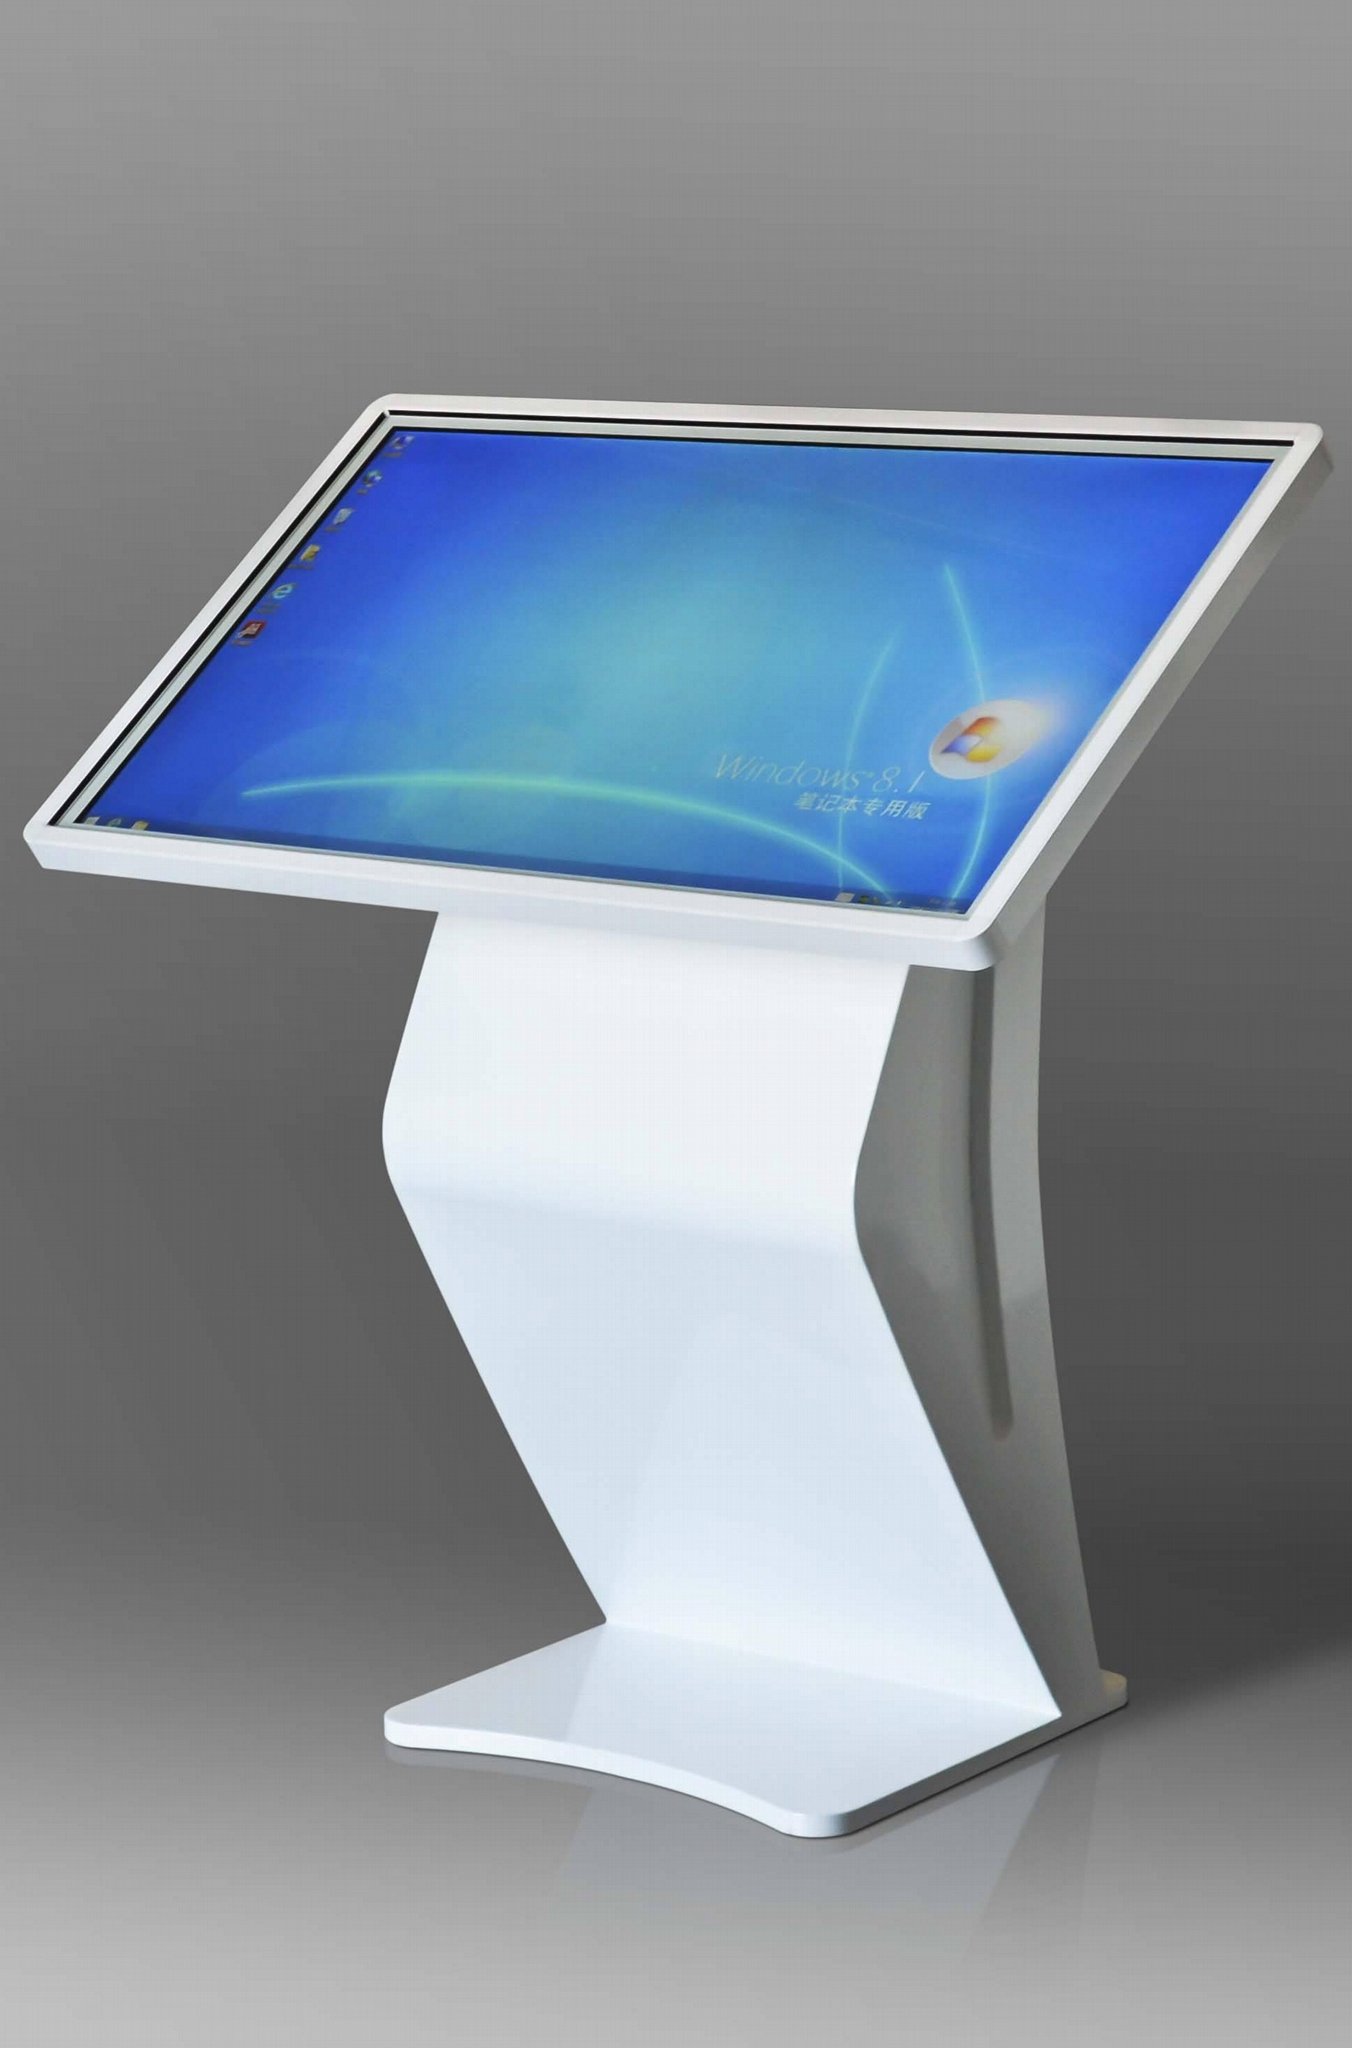 55Inch Floor Standing Interactive Touch Advertising Machine With Windows System 2